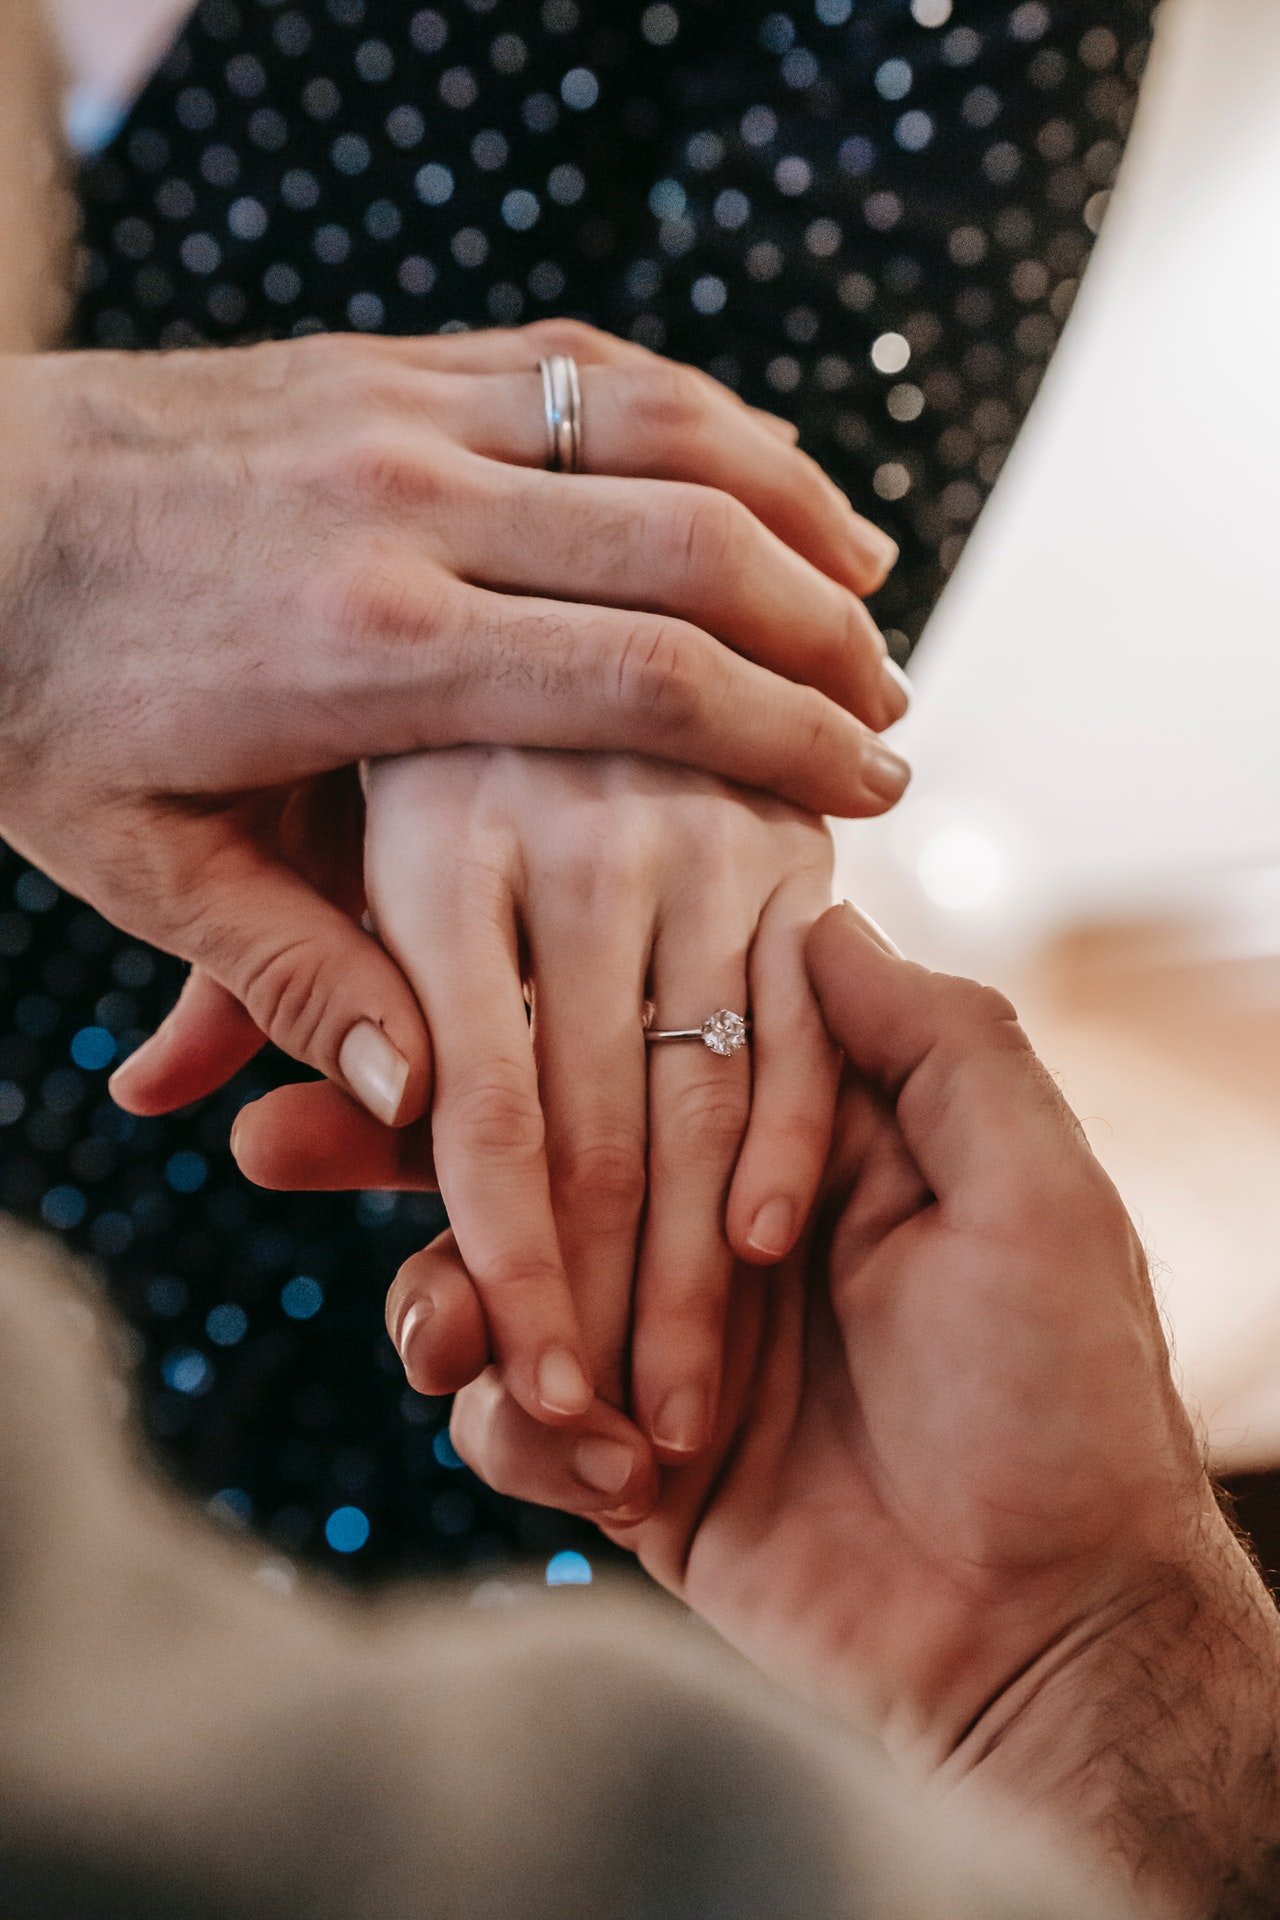 Man holding woman's hand | Source: Pexels